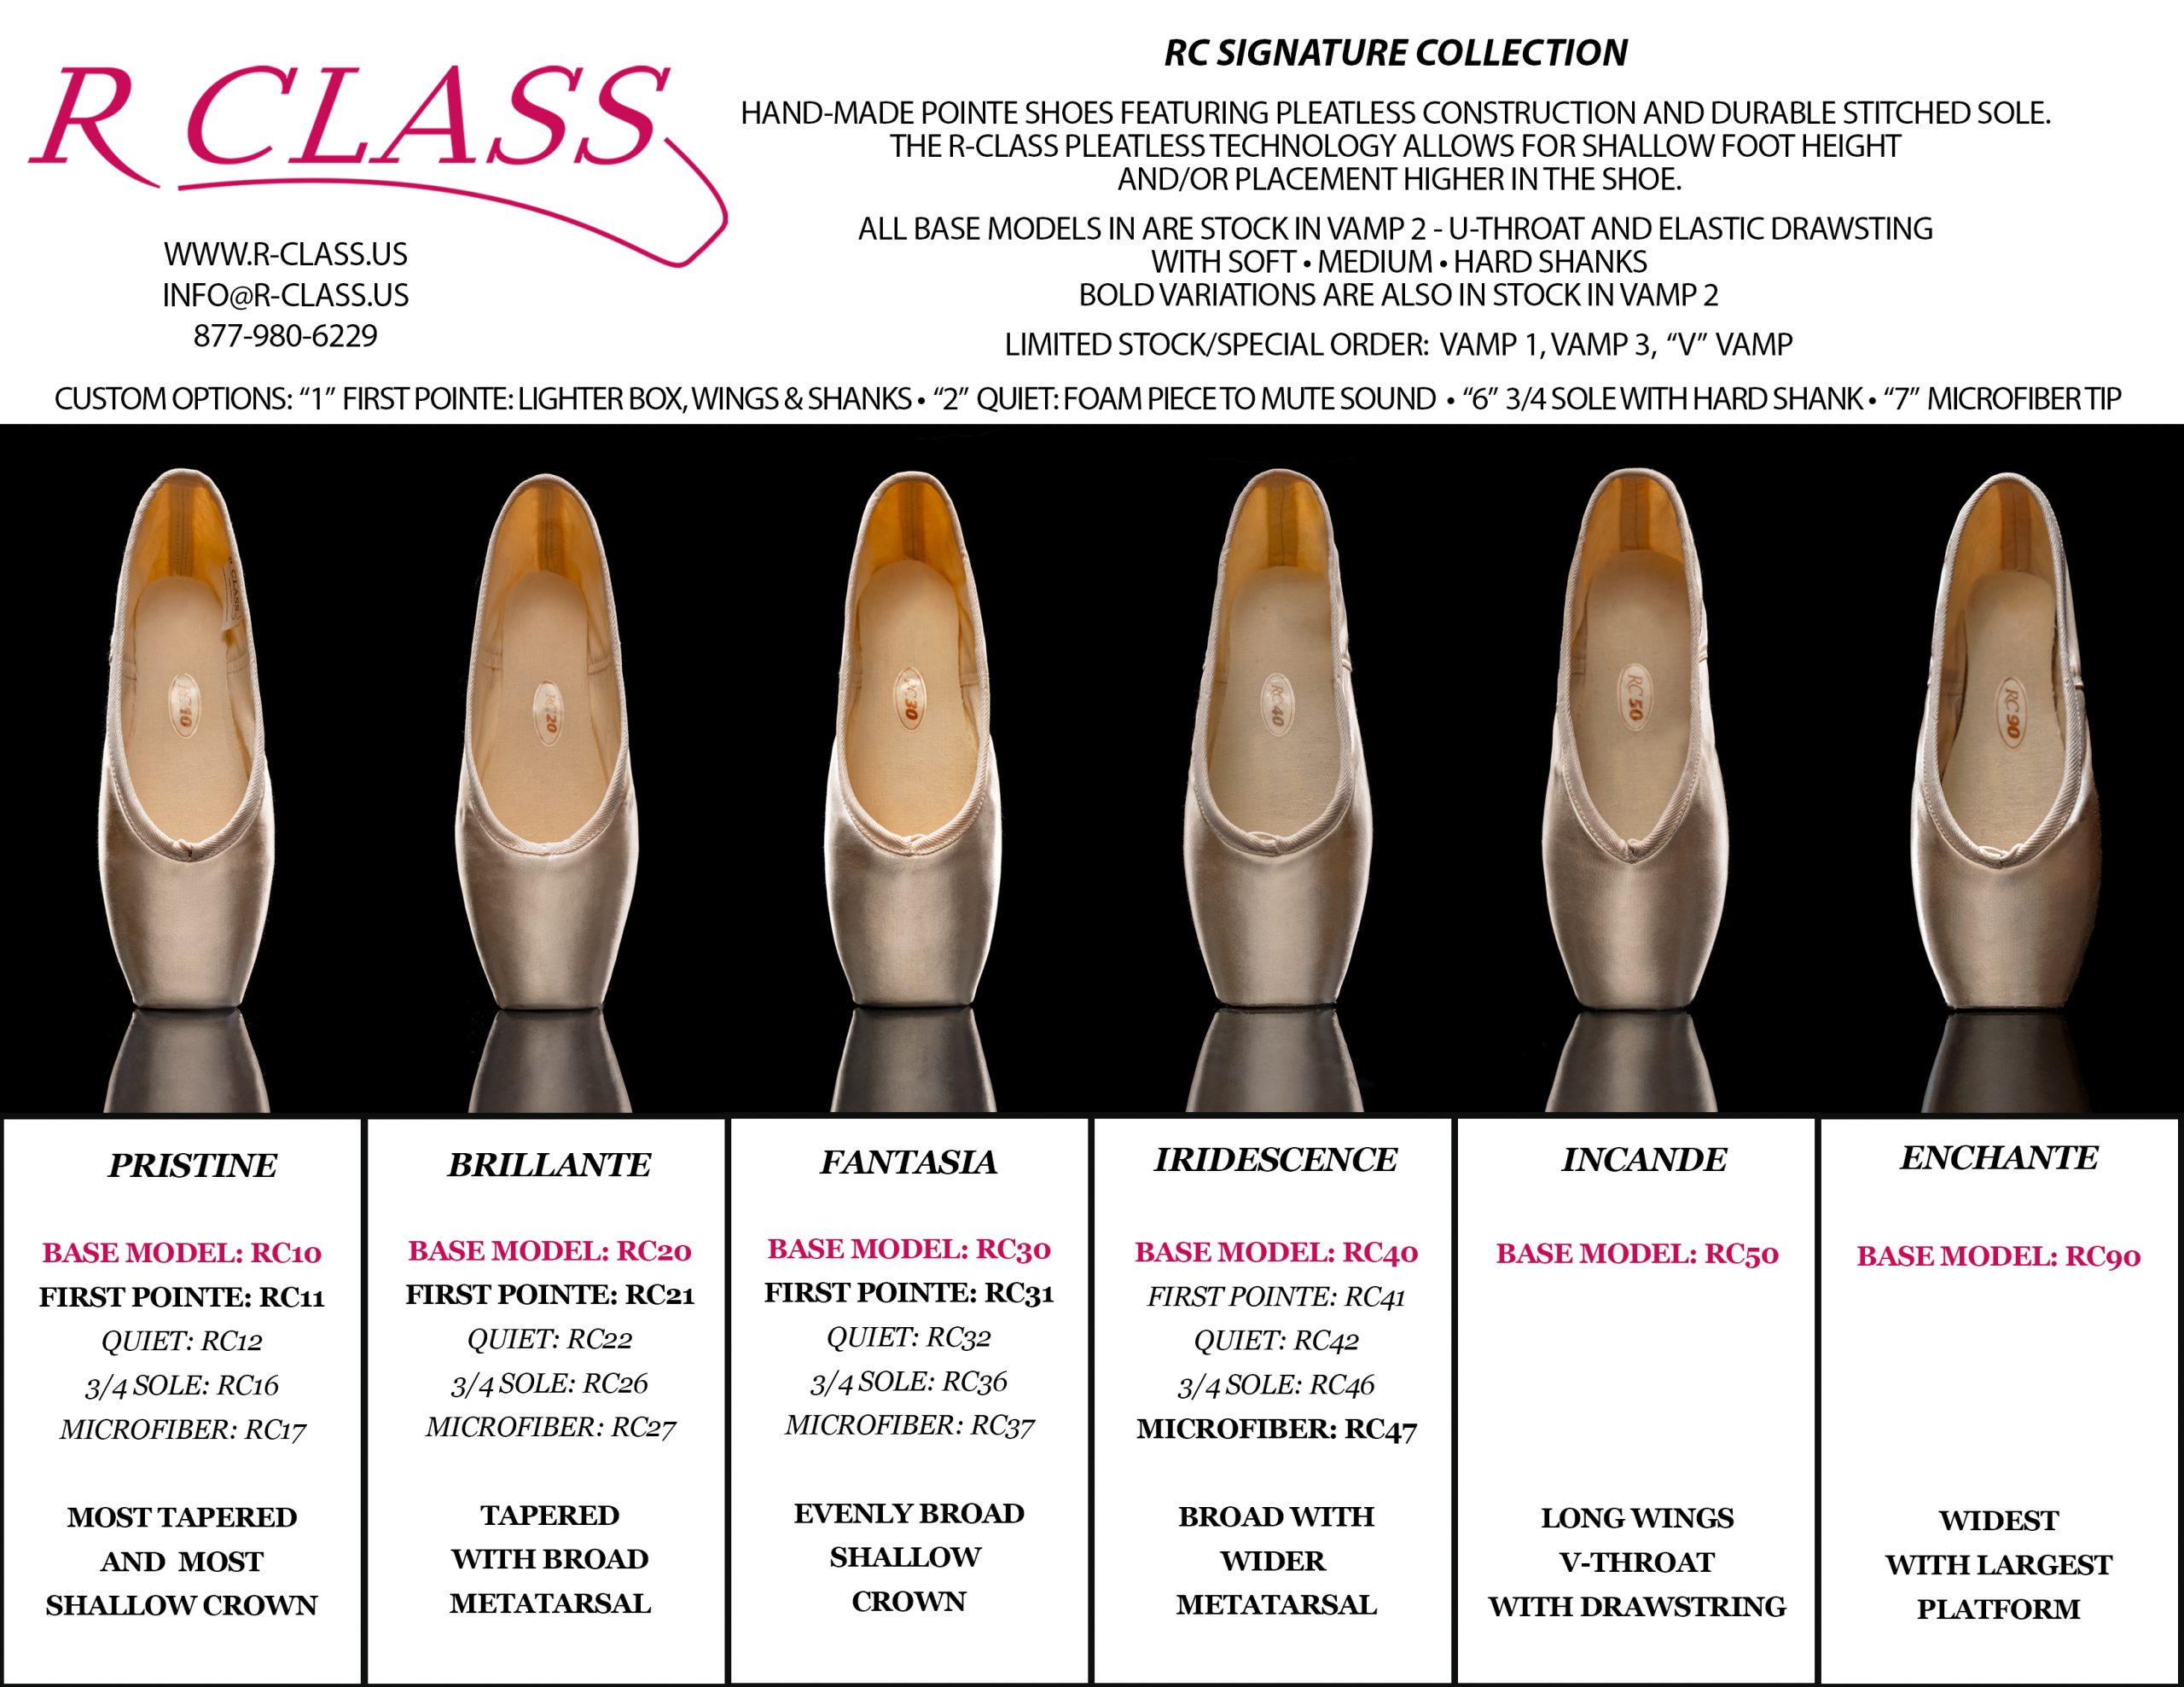 R-Class RC Signature Collection images of all pleatless pointe shoe models from the front to see different in box shapes